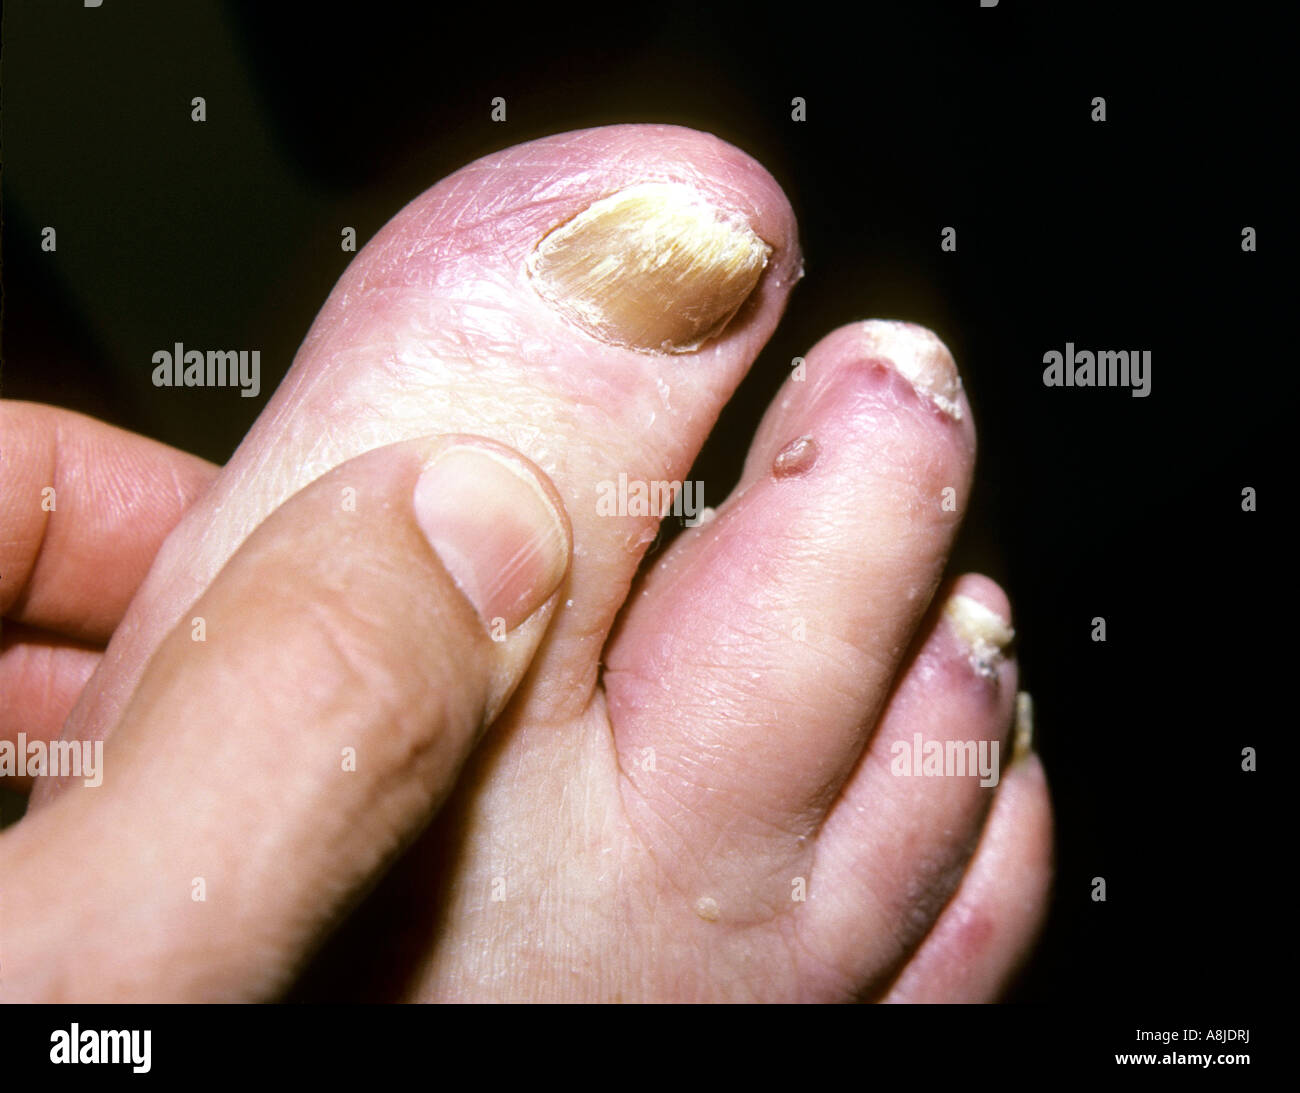 Close up photo of Kaposi sarcoma lesion on patient's toes.This image may not be  model released due to non-recognizable person  Stock Photo